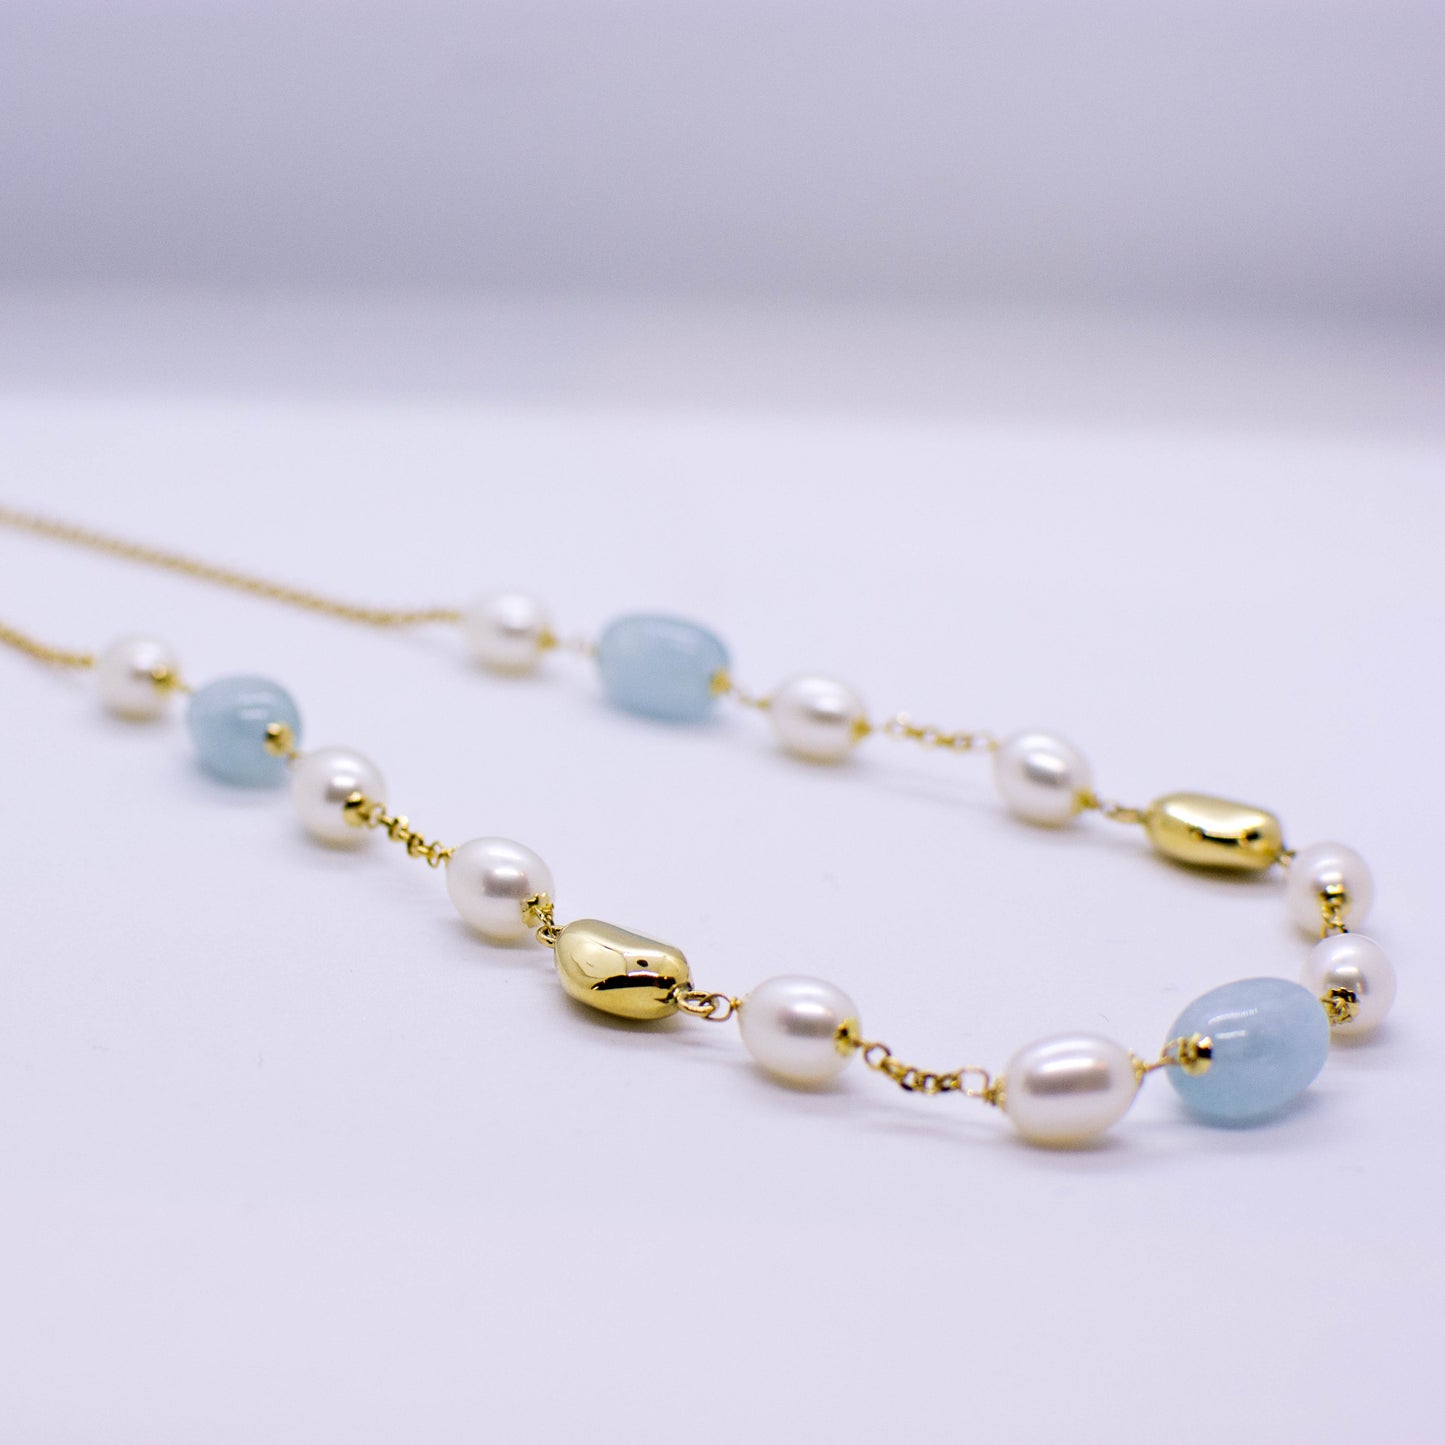 18ct Gold Silky Aquamarine and Cultured Freshwater Pearl Chain Necklace Pearl dimensions: 10mm x 8mm approximately Silky Aquamarine dimensions: 12mm x 10mm approximately 43cm long 18ct yellow gold This item can be ordered in a variety of lengths.  Please contact us for custom requirements.